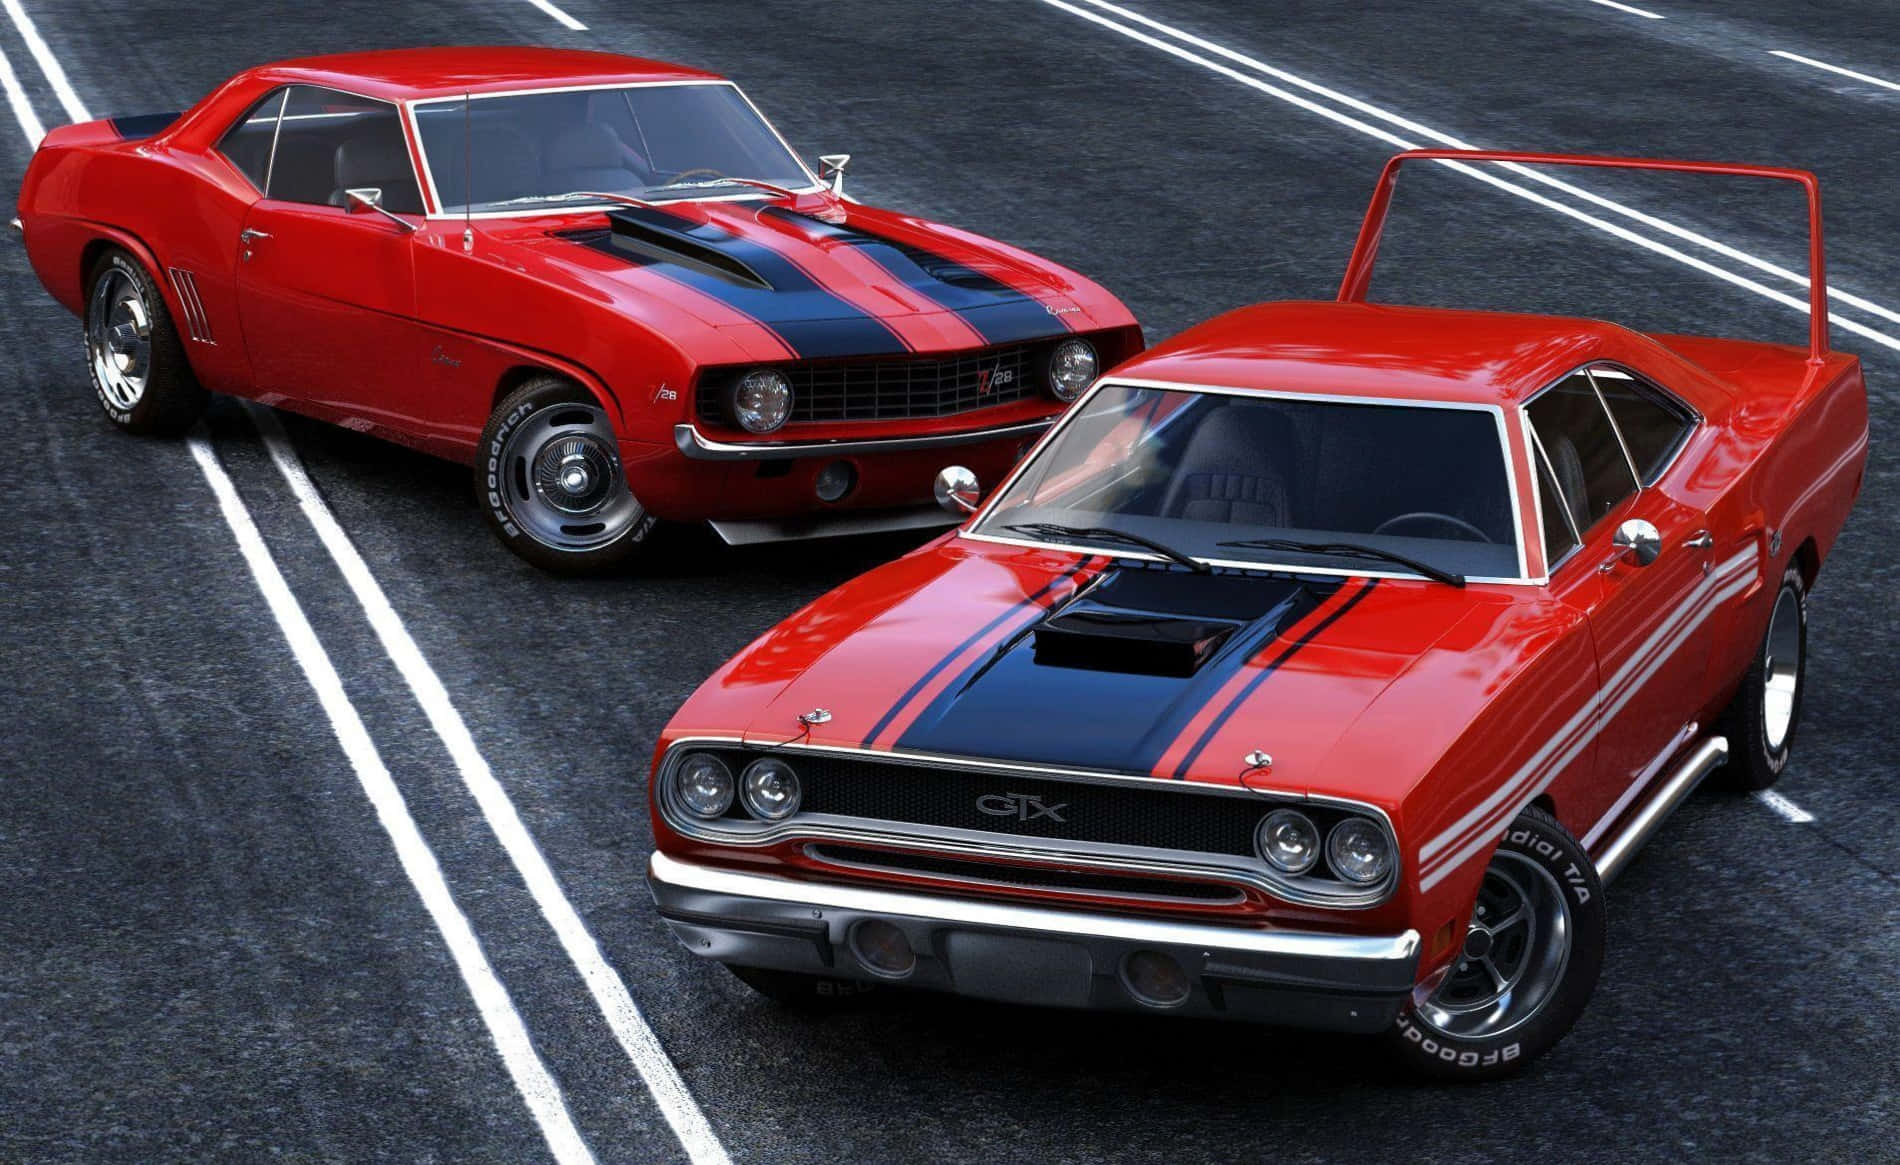 Two Red Muscle Cars On The Road